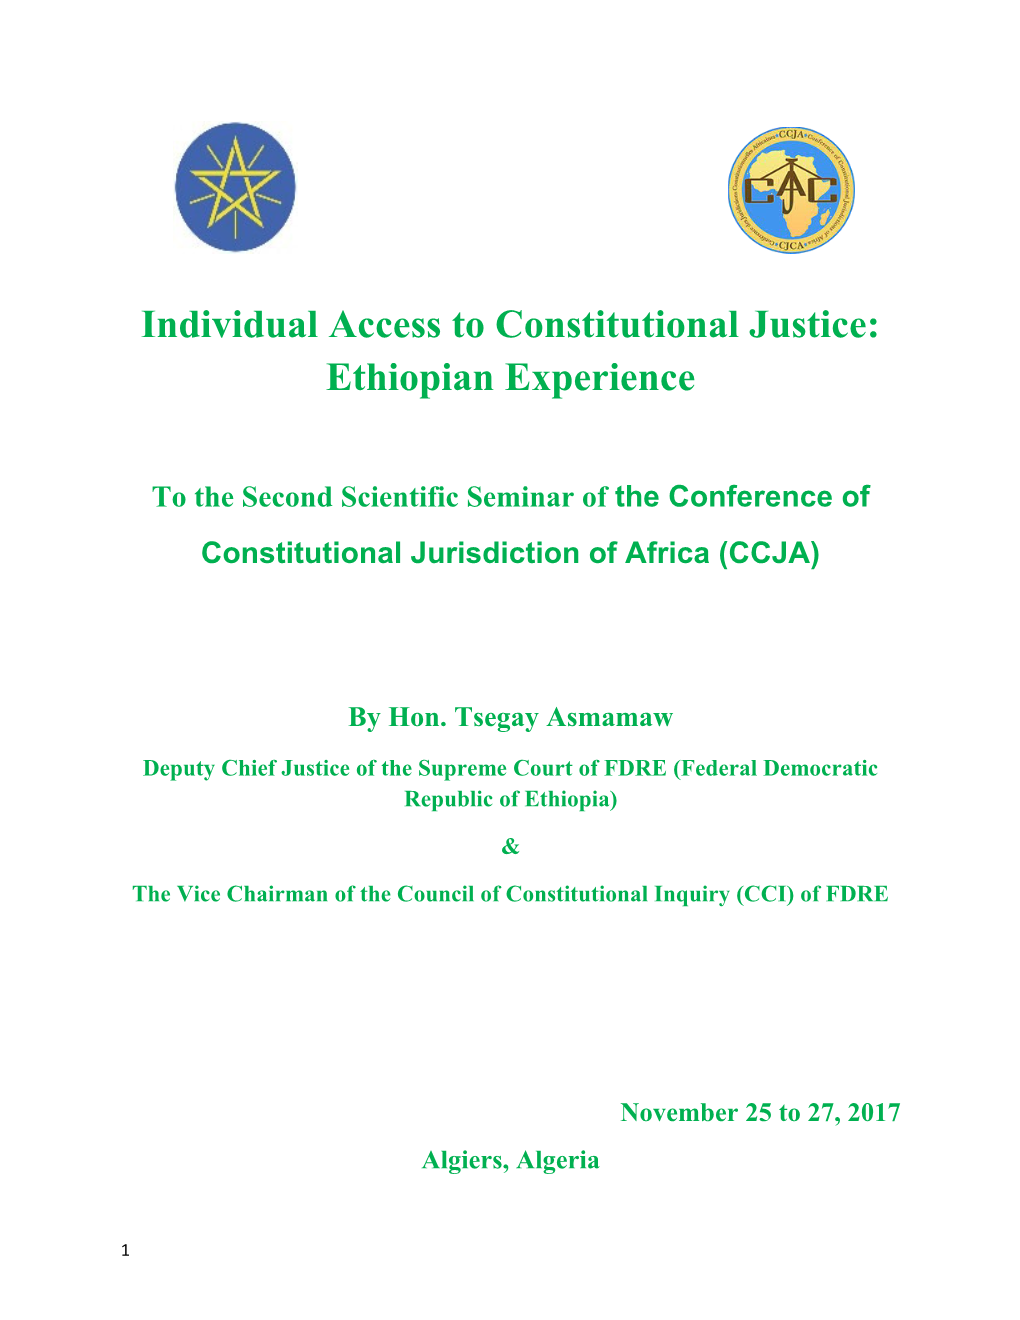 Individual Access to Constitutional Justice: Ethiopian Experience